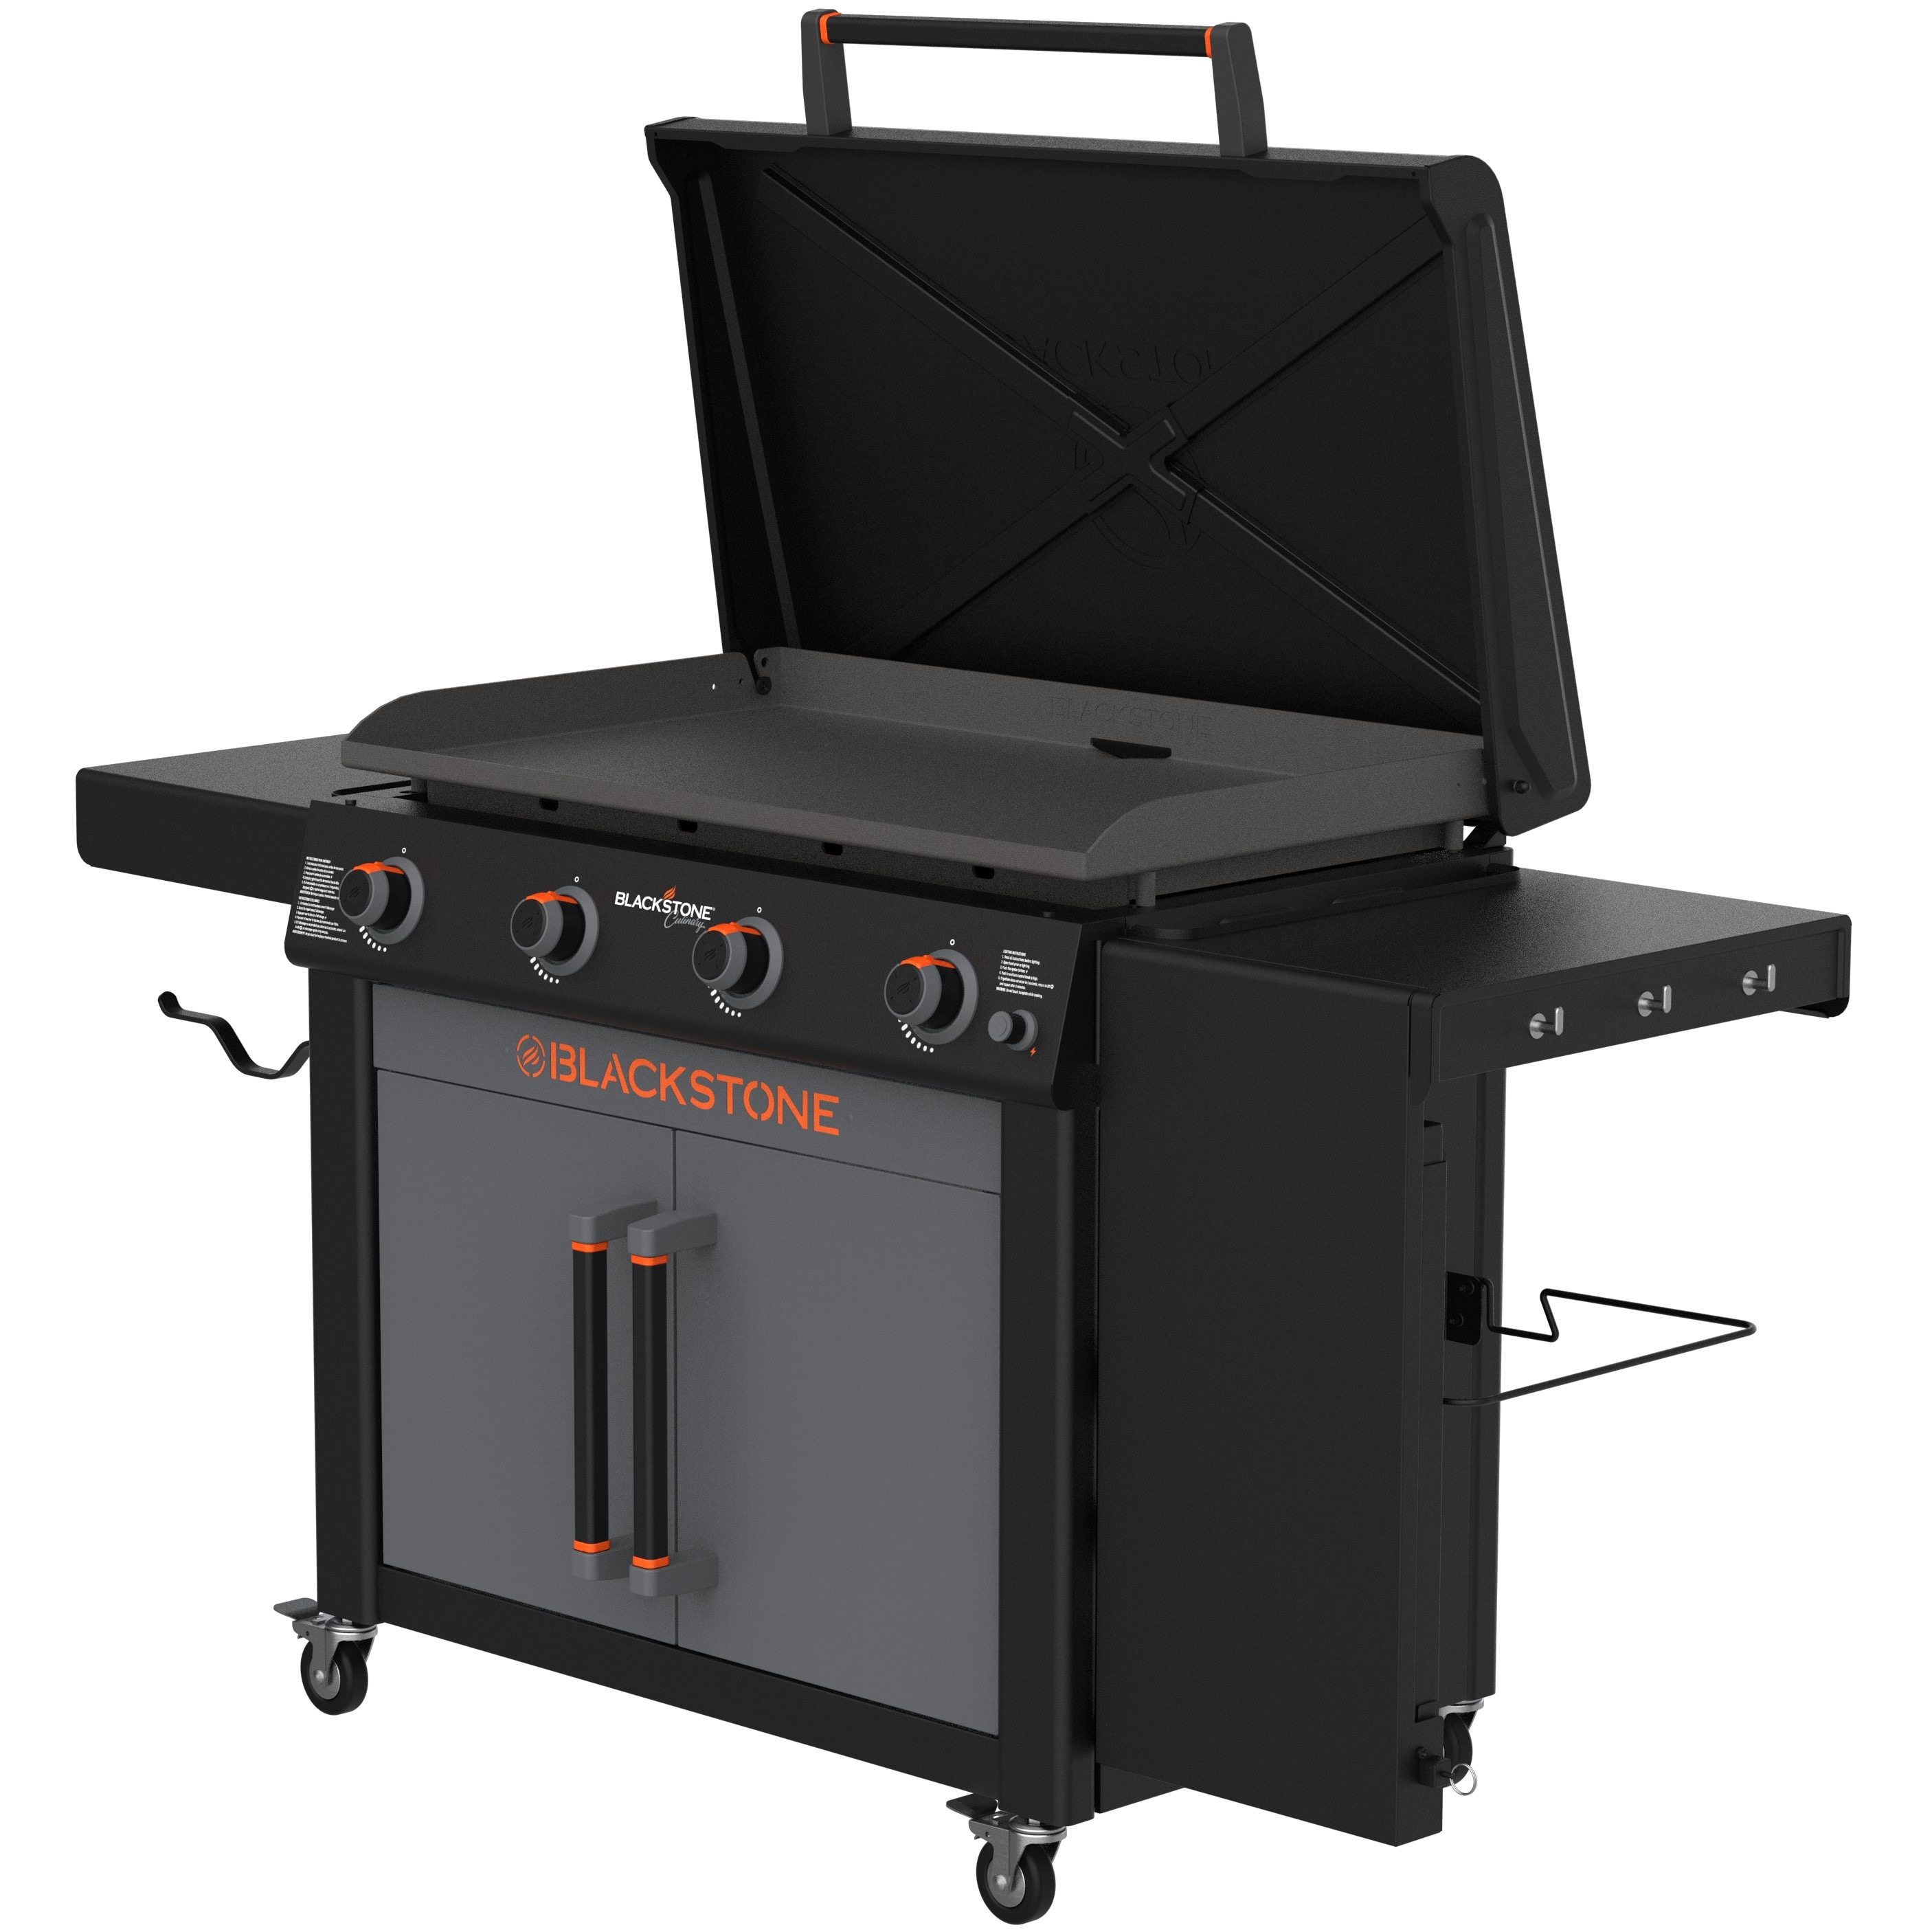 Treat Yourself to a Super Versatile Blackstone Outdoor Griddle